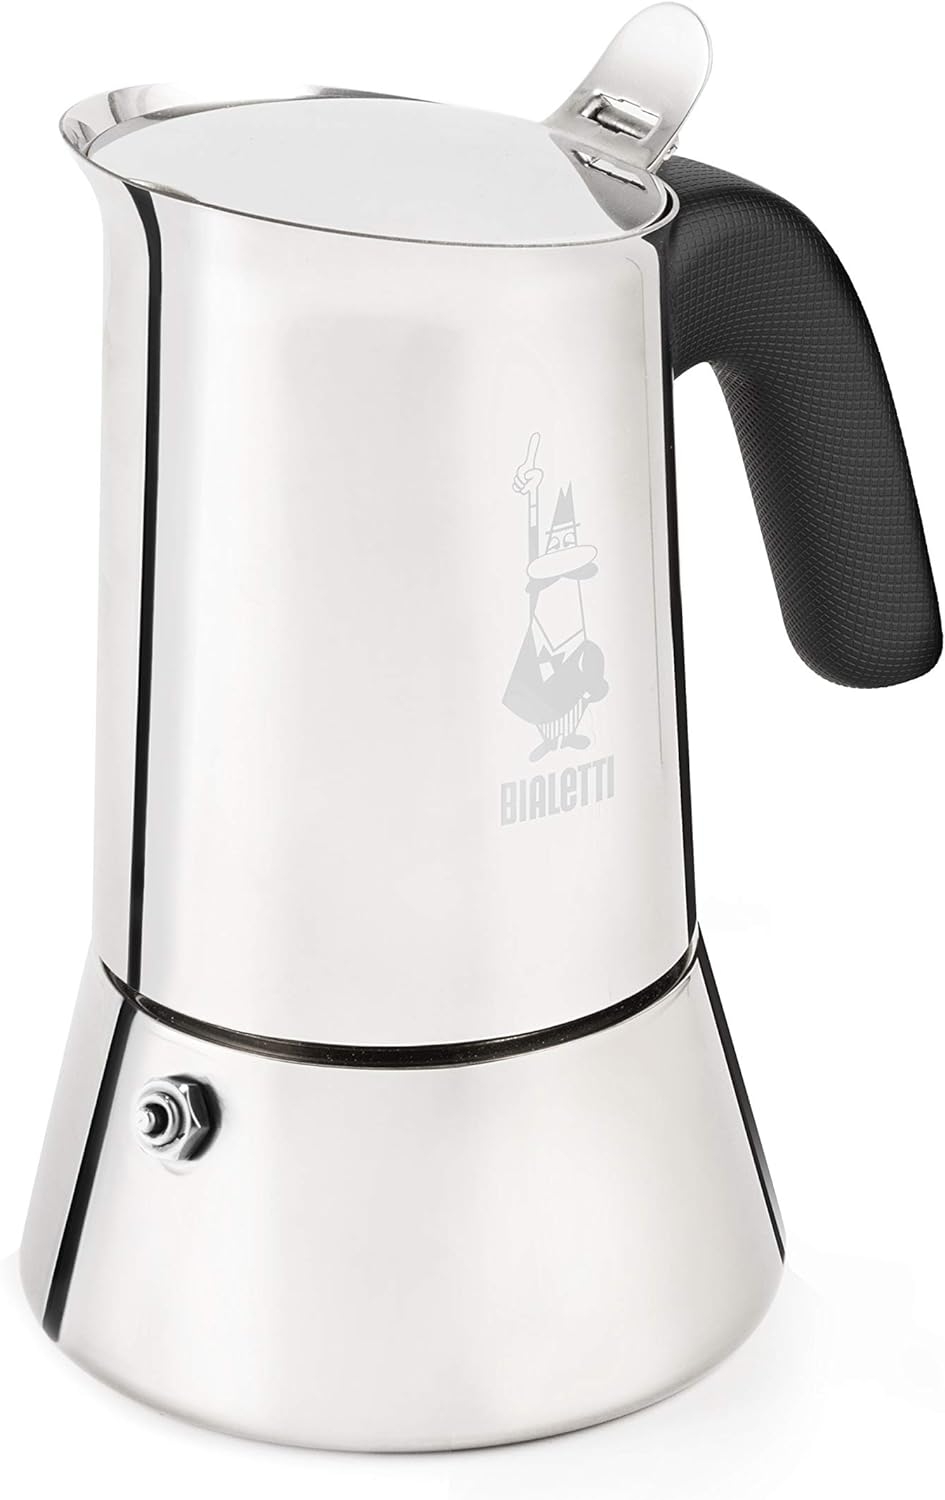 Bialetti New Venus Induction, Stovetop Coffee Maker, 18/10 Steel, 4-Cup Espresso, suitable for all types of hobs